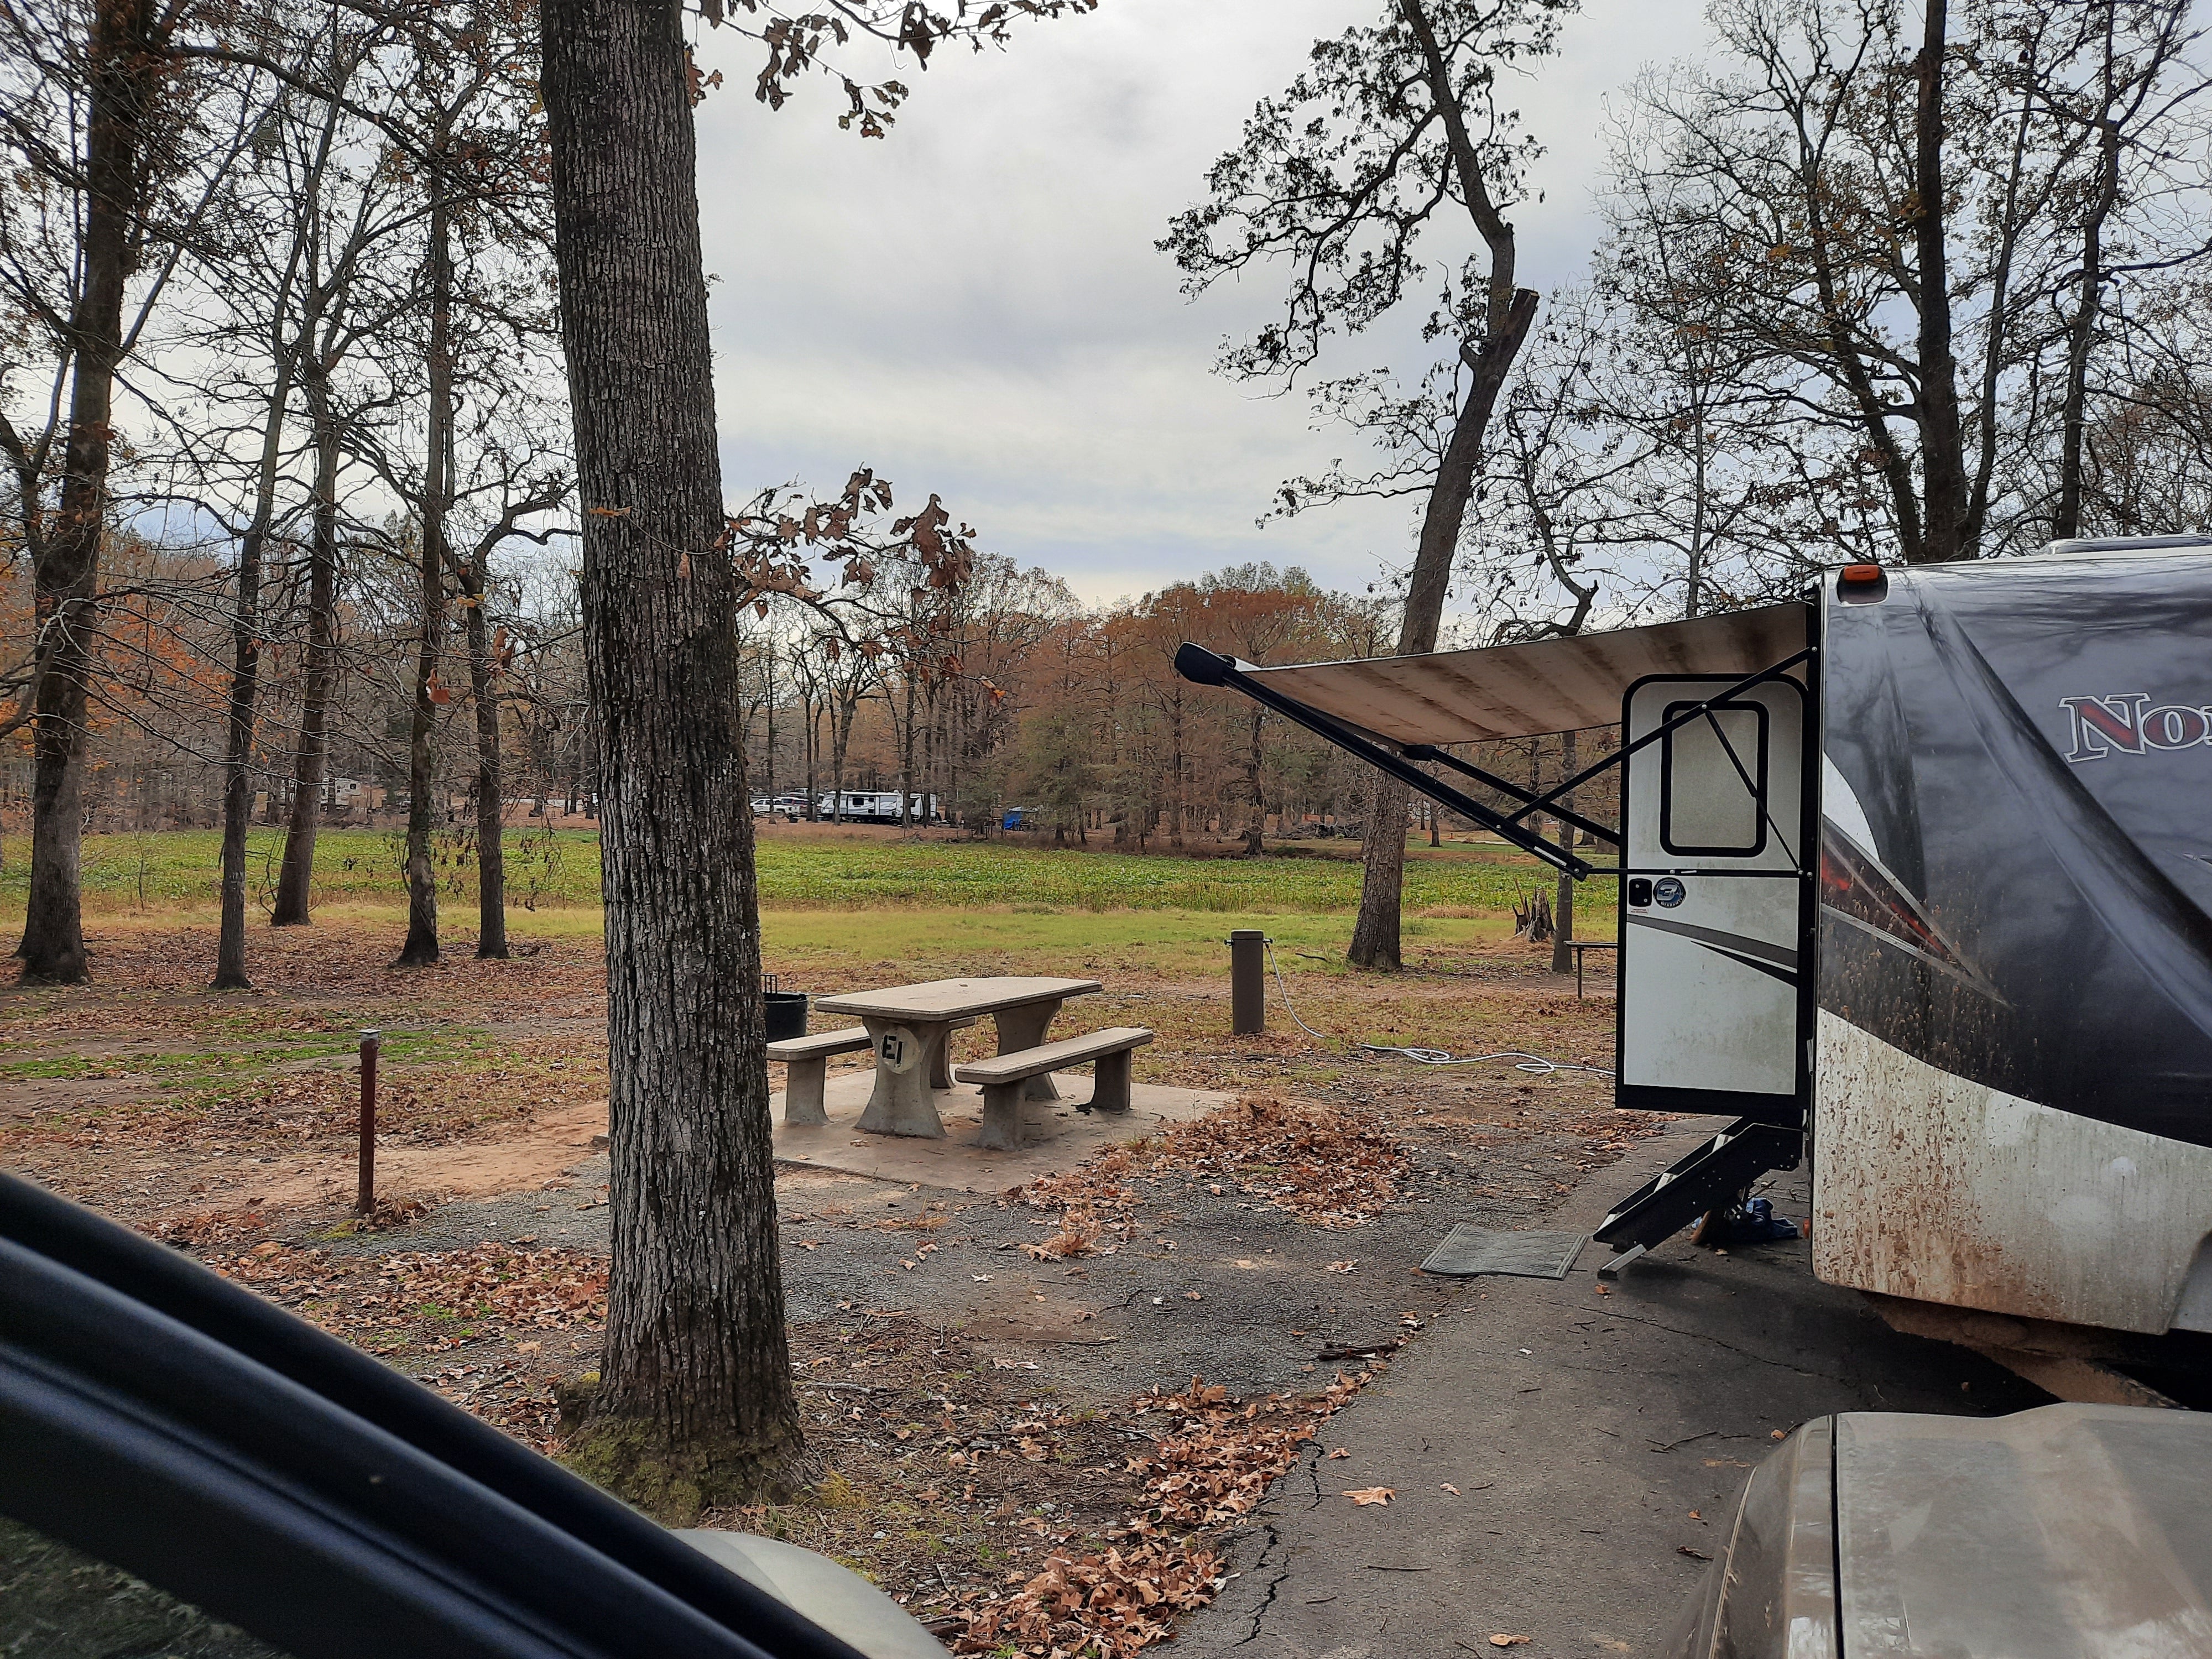 Camper submitted image from COE Arkansas River Merrisach Lake Park - 5